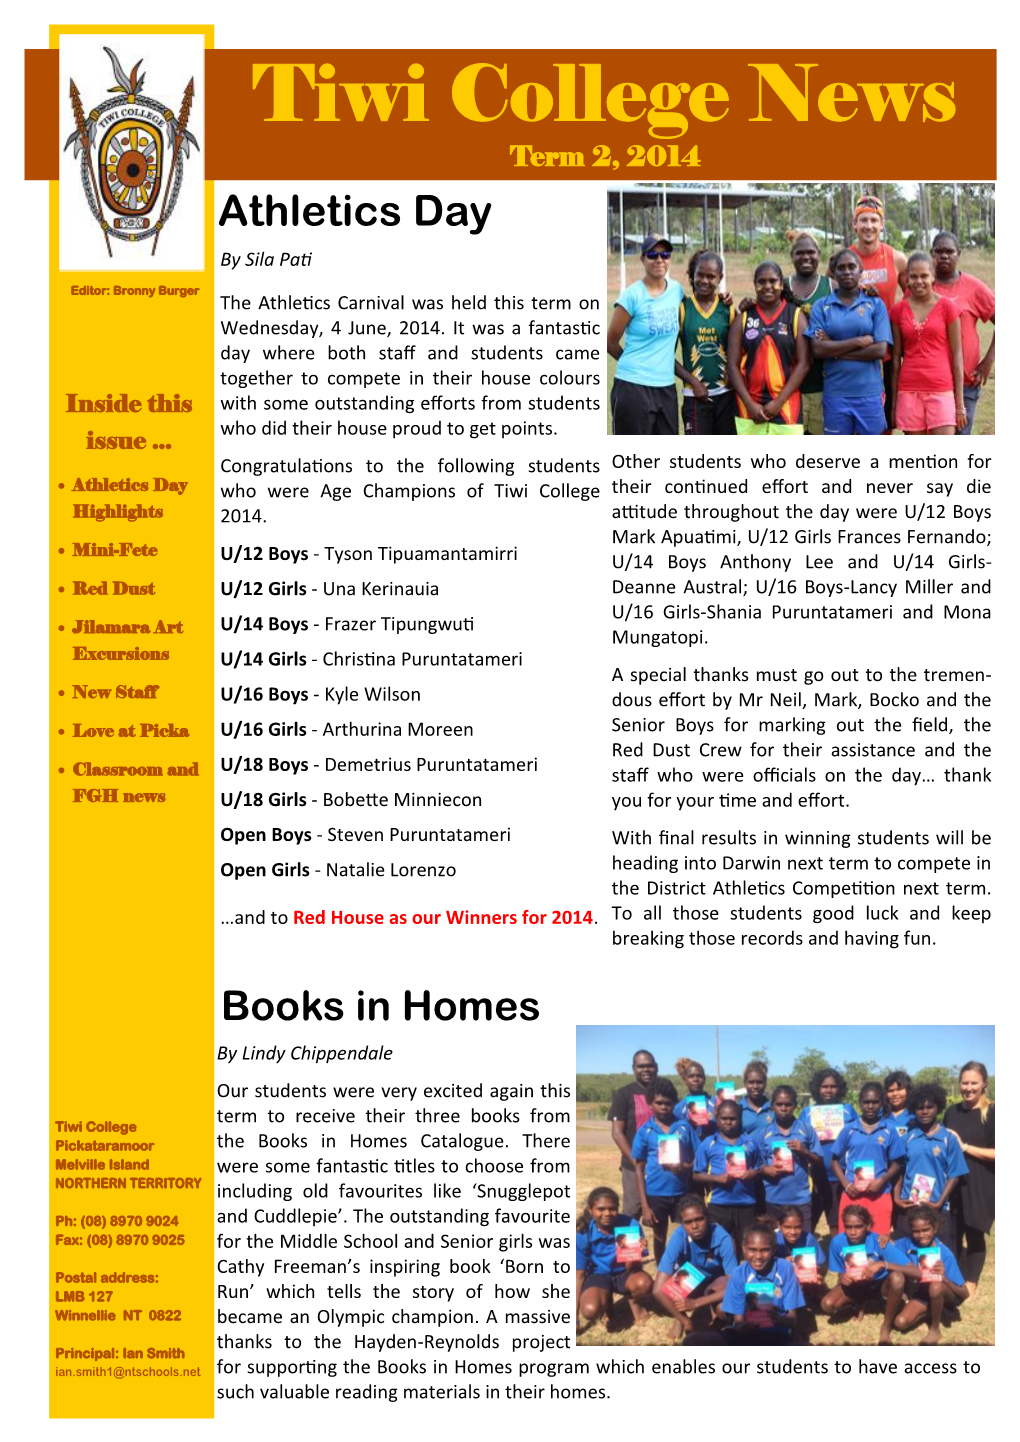 Tiwi College News Term Two 2014